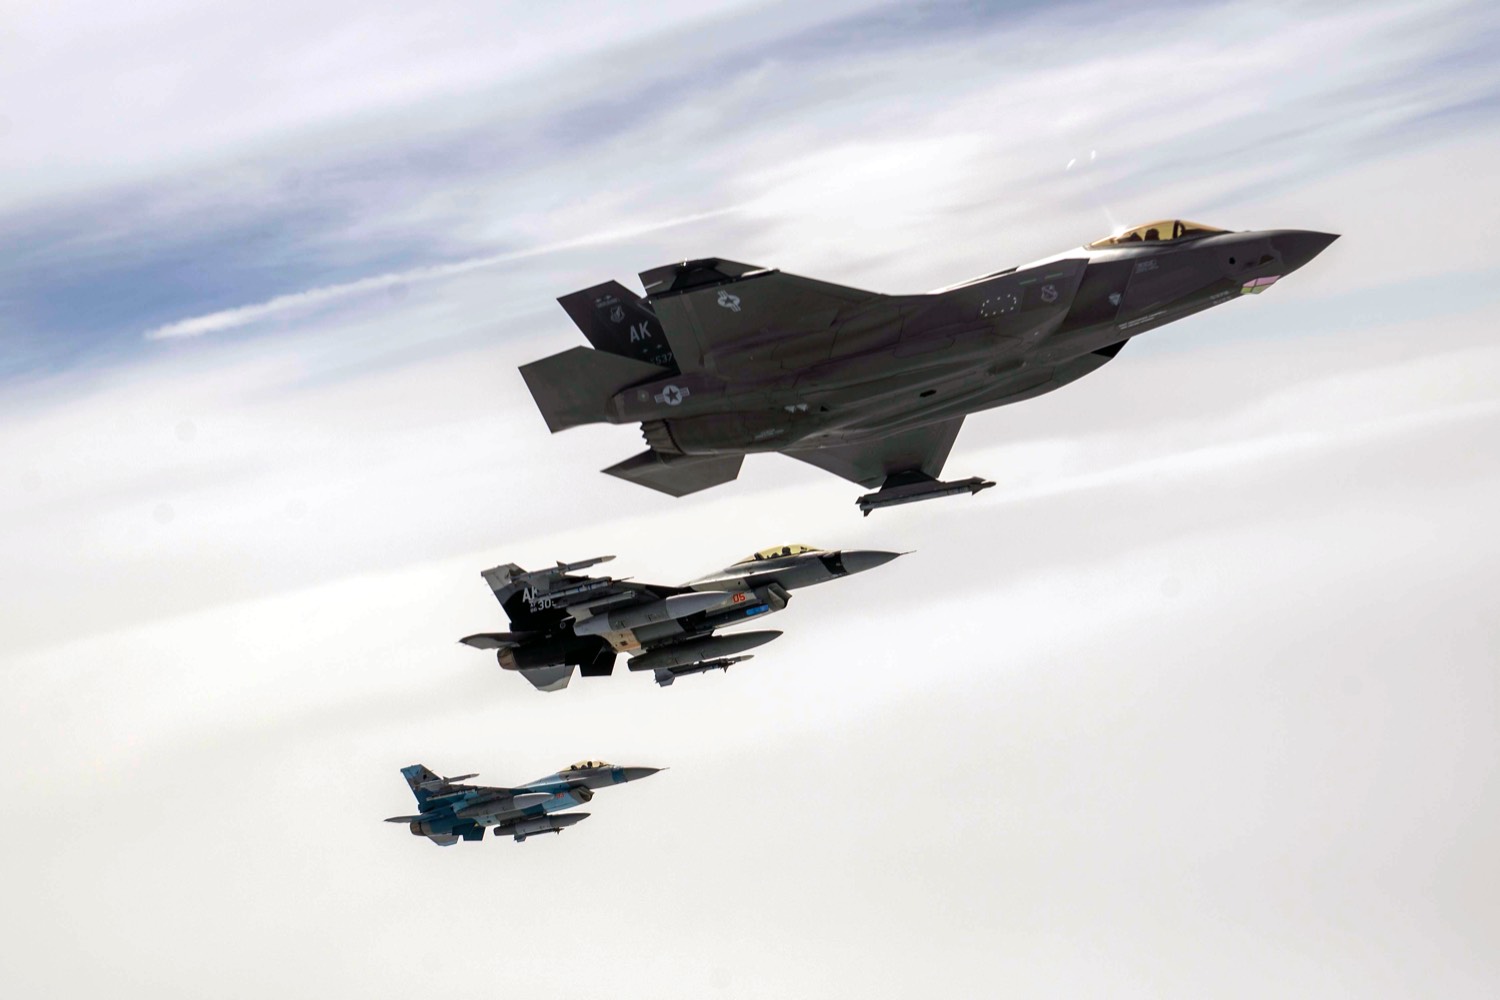 An F-35A Lightning II and two F-16 Fighting Falcons, assigned to Eielson Air Force Base, Alaska, fly above the Joint Pacific Alaska Range Complex, July 28, 2021. The aircraft participated in air refueling with an Alaska Air National Guard KC-135R Stratotanker. (U.S. Air Force photo by Staff Sgt. Kaylee Dubois)